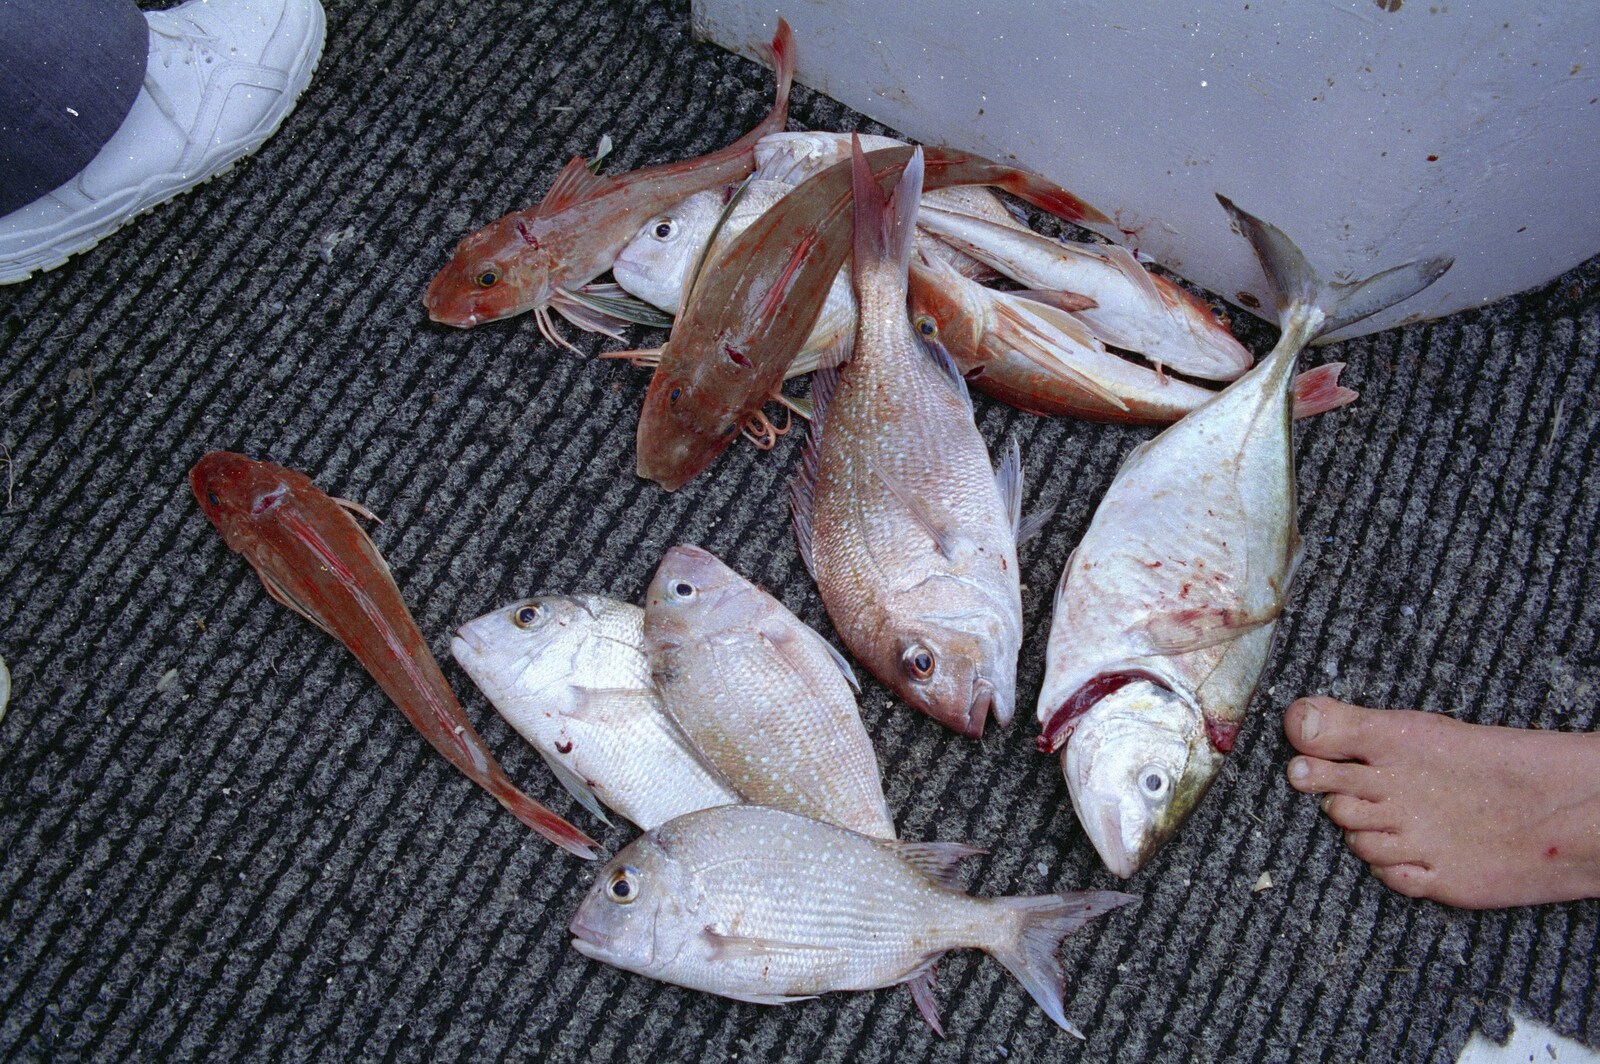 Our catch of the day from Ferry Landing, Whitianga, New Zealand - 23rd November 1992